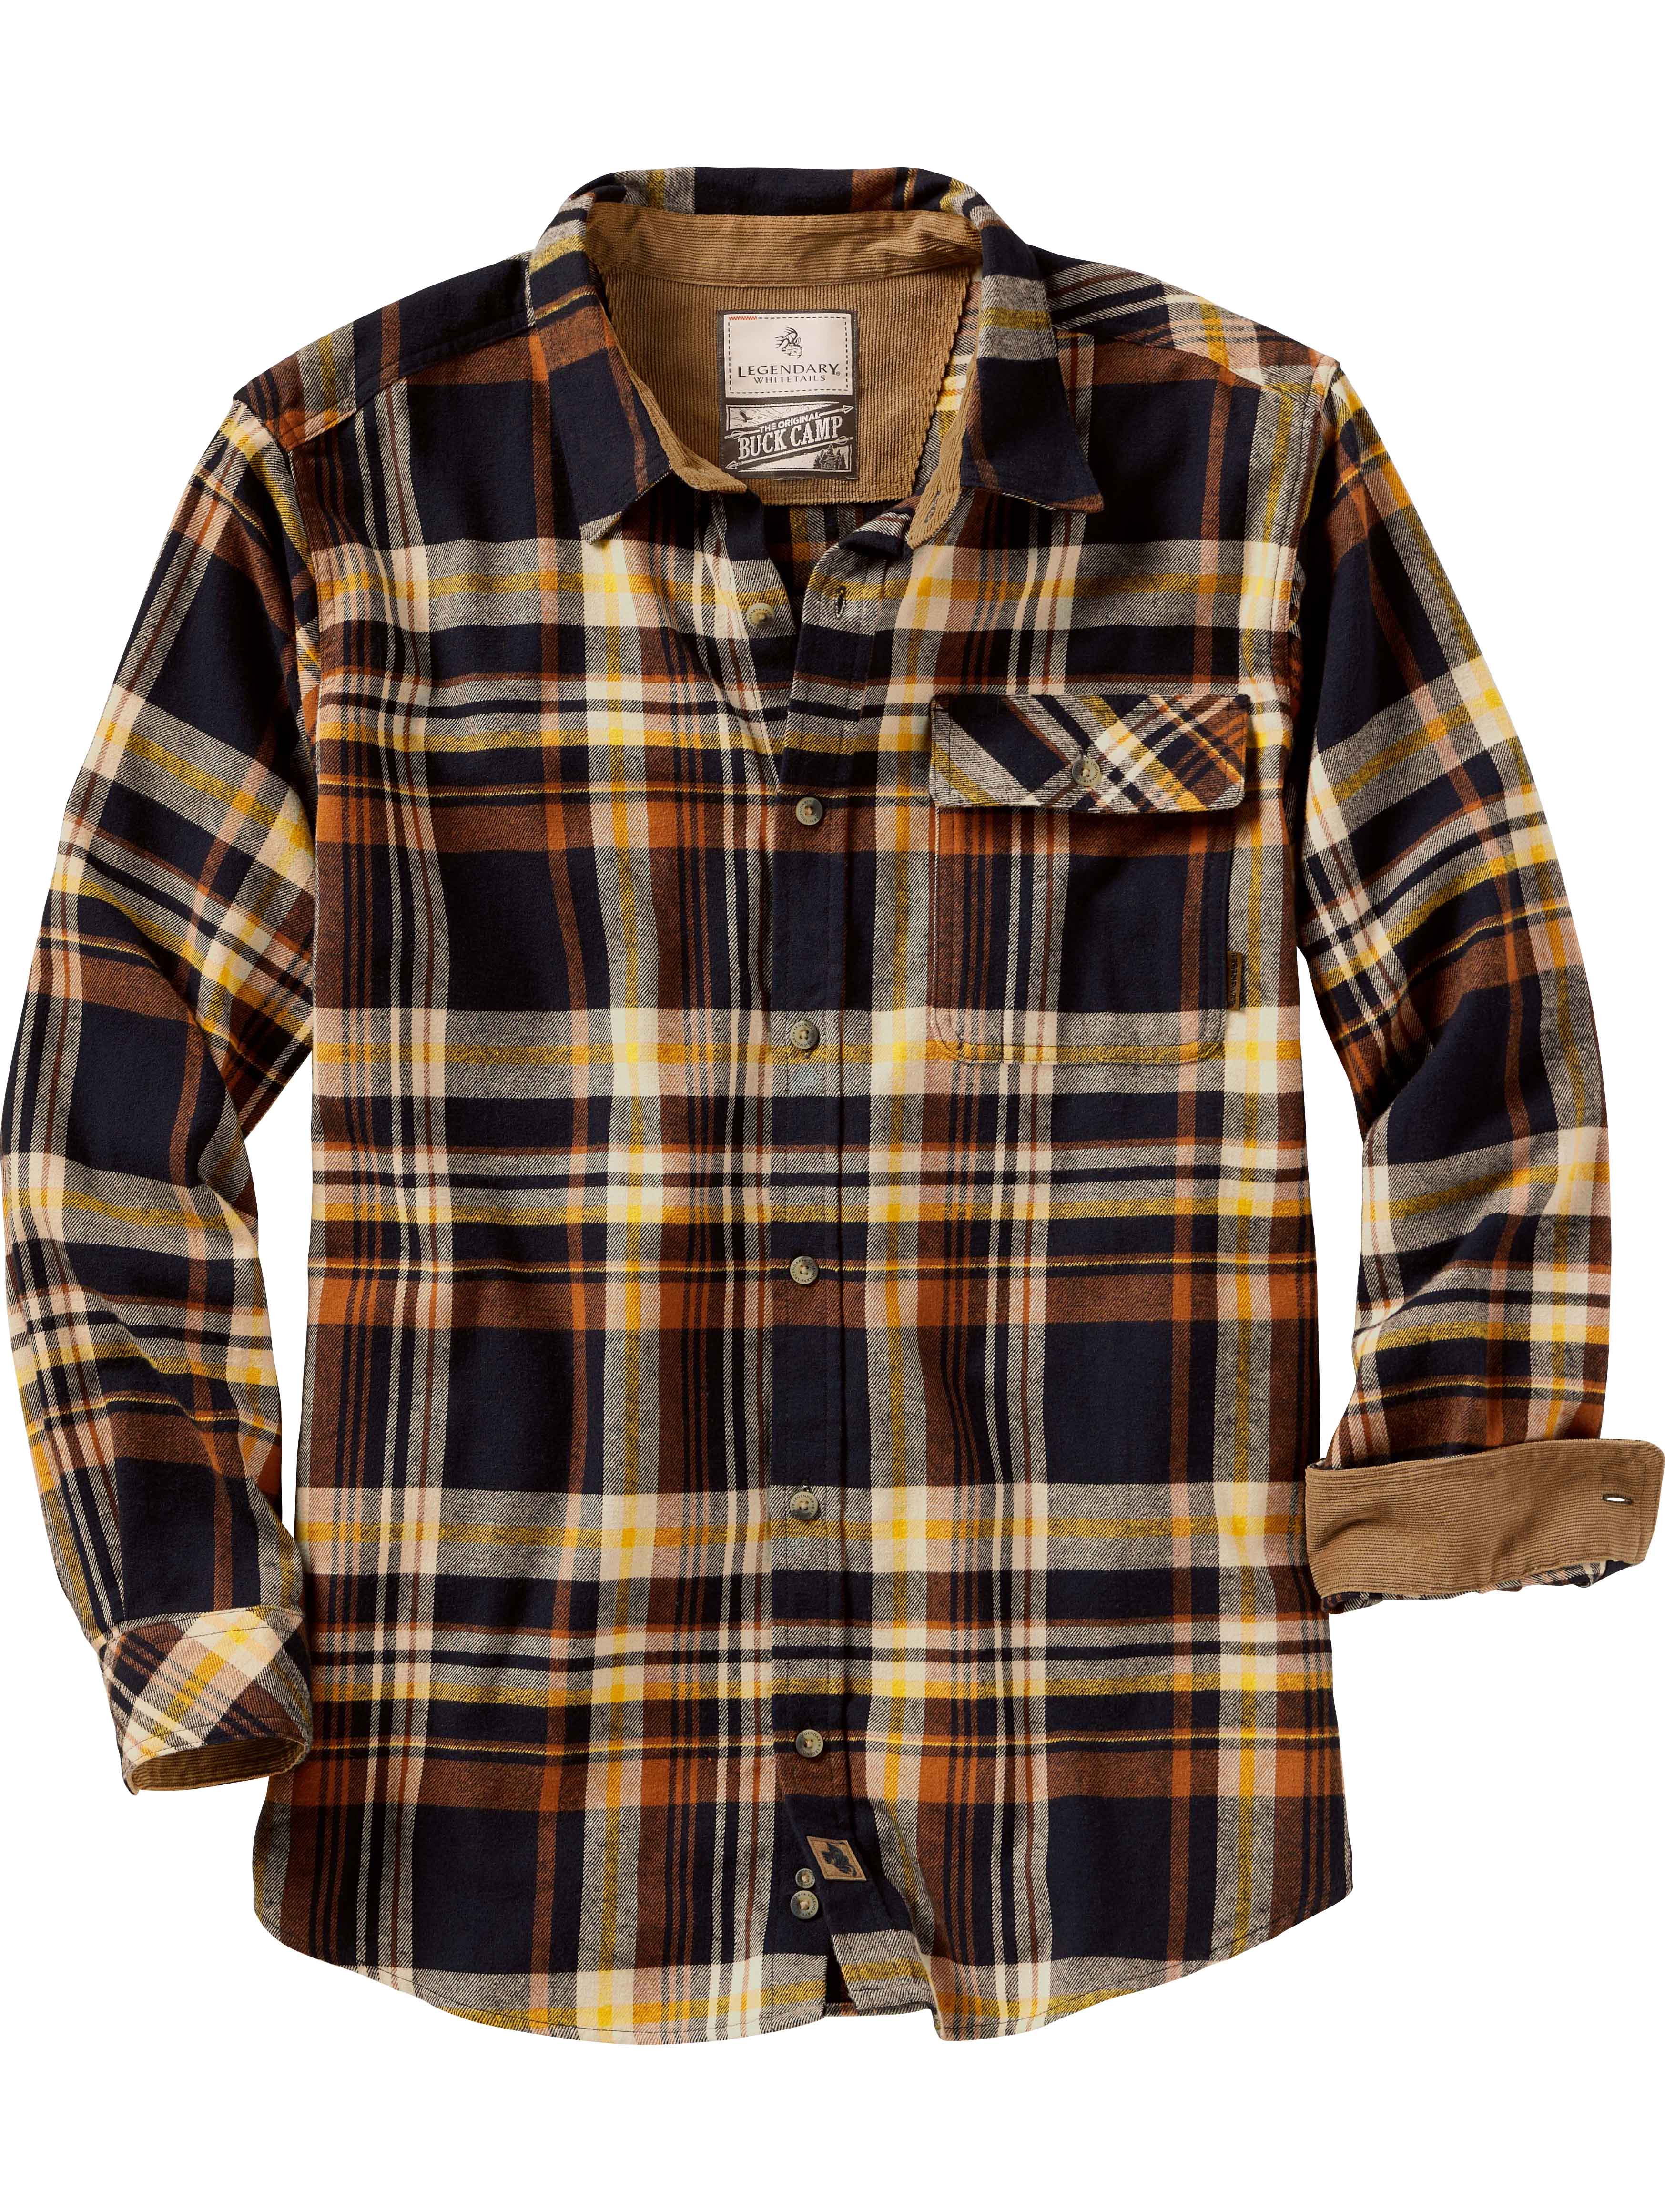 Legendary Whitetails Buck Camp Flannels Homestead Plaid,XX-Large Tall ...